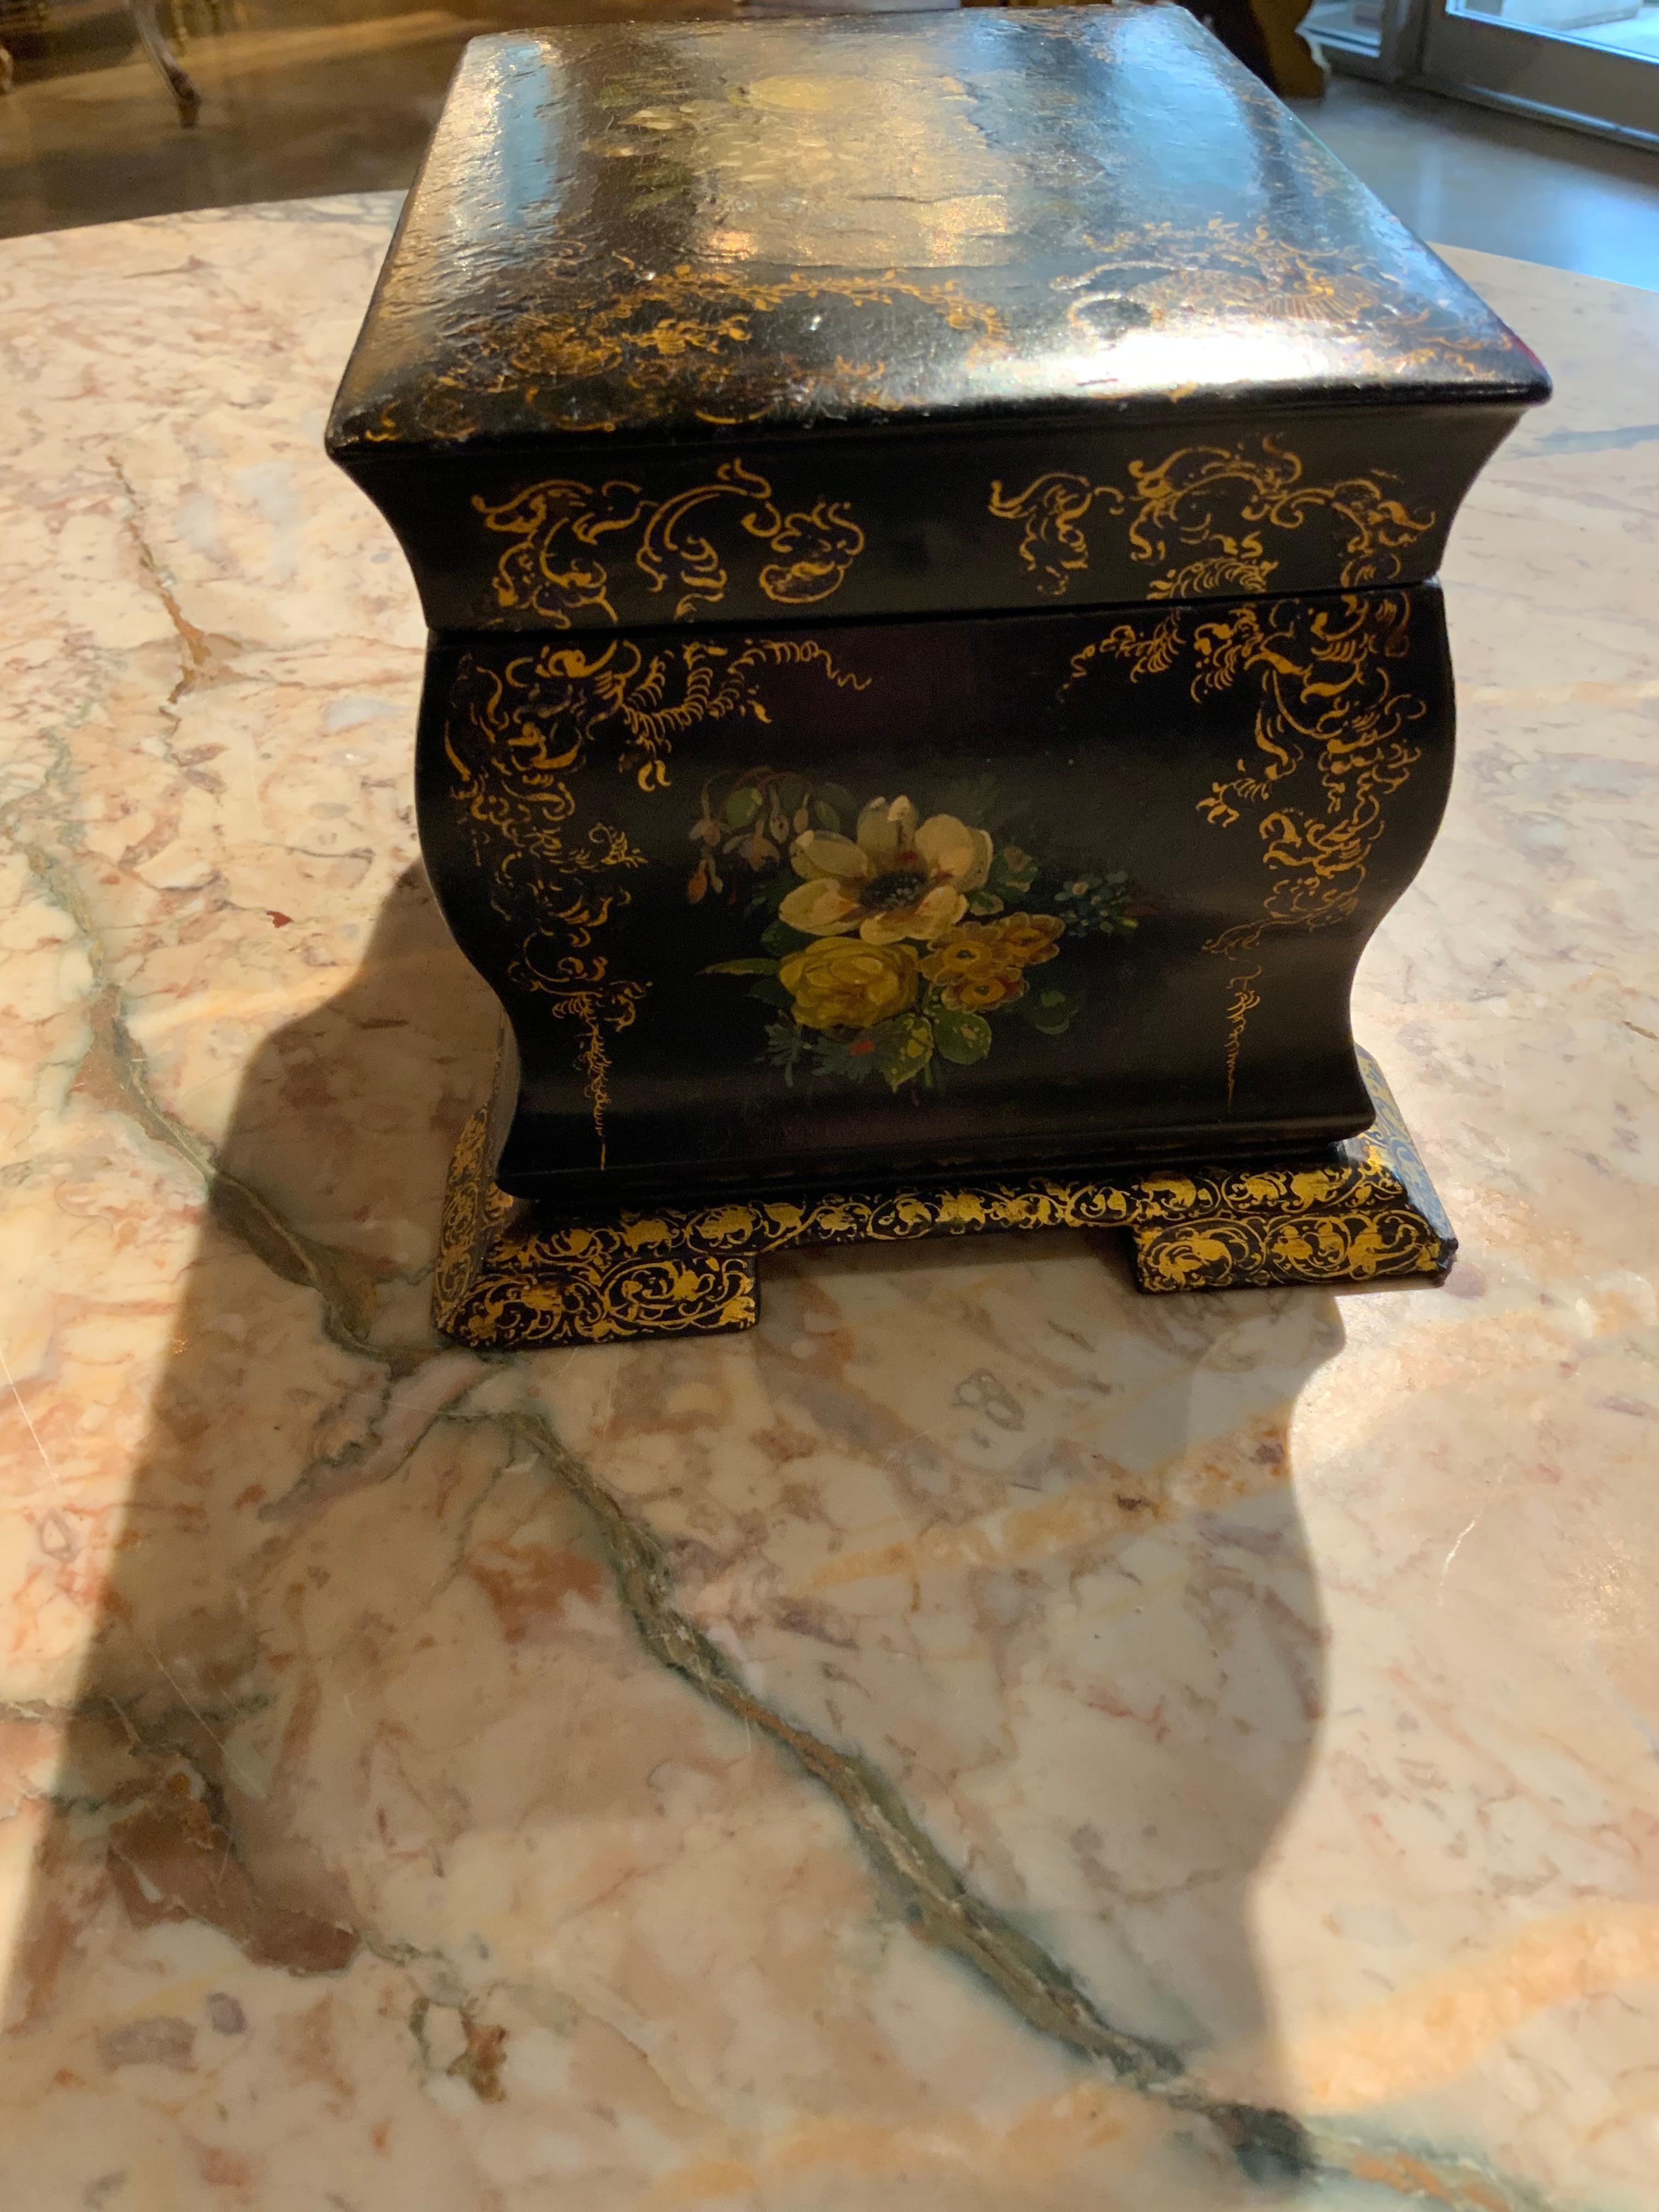 Papier-Mâché Tea Caddie /1850 with Floral and Foliate Designs with Black Ground In Excellent Condition For Sale In Houston, TX